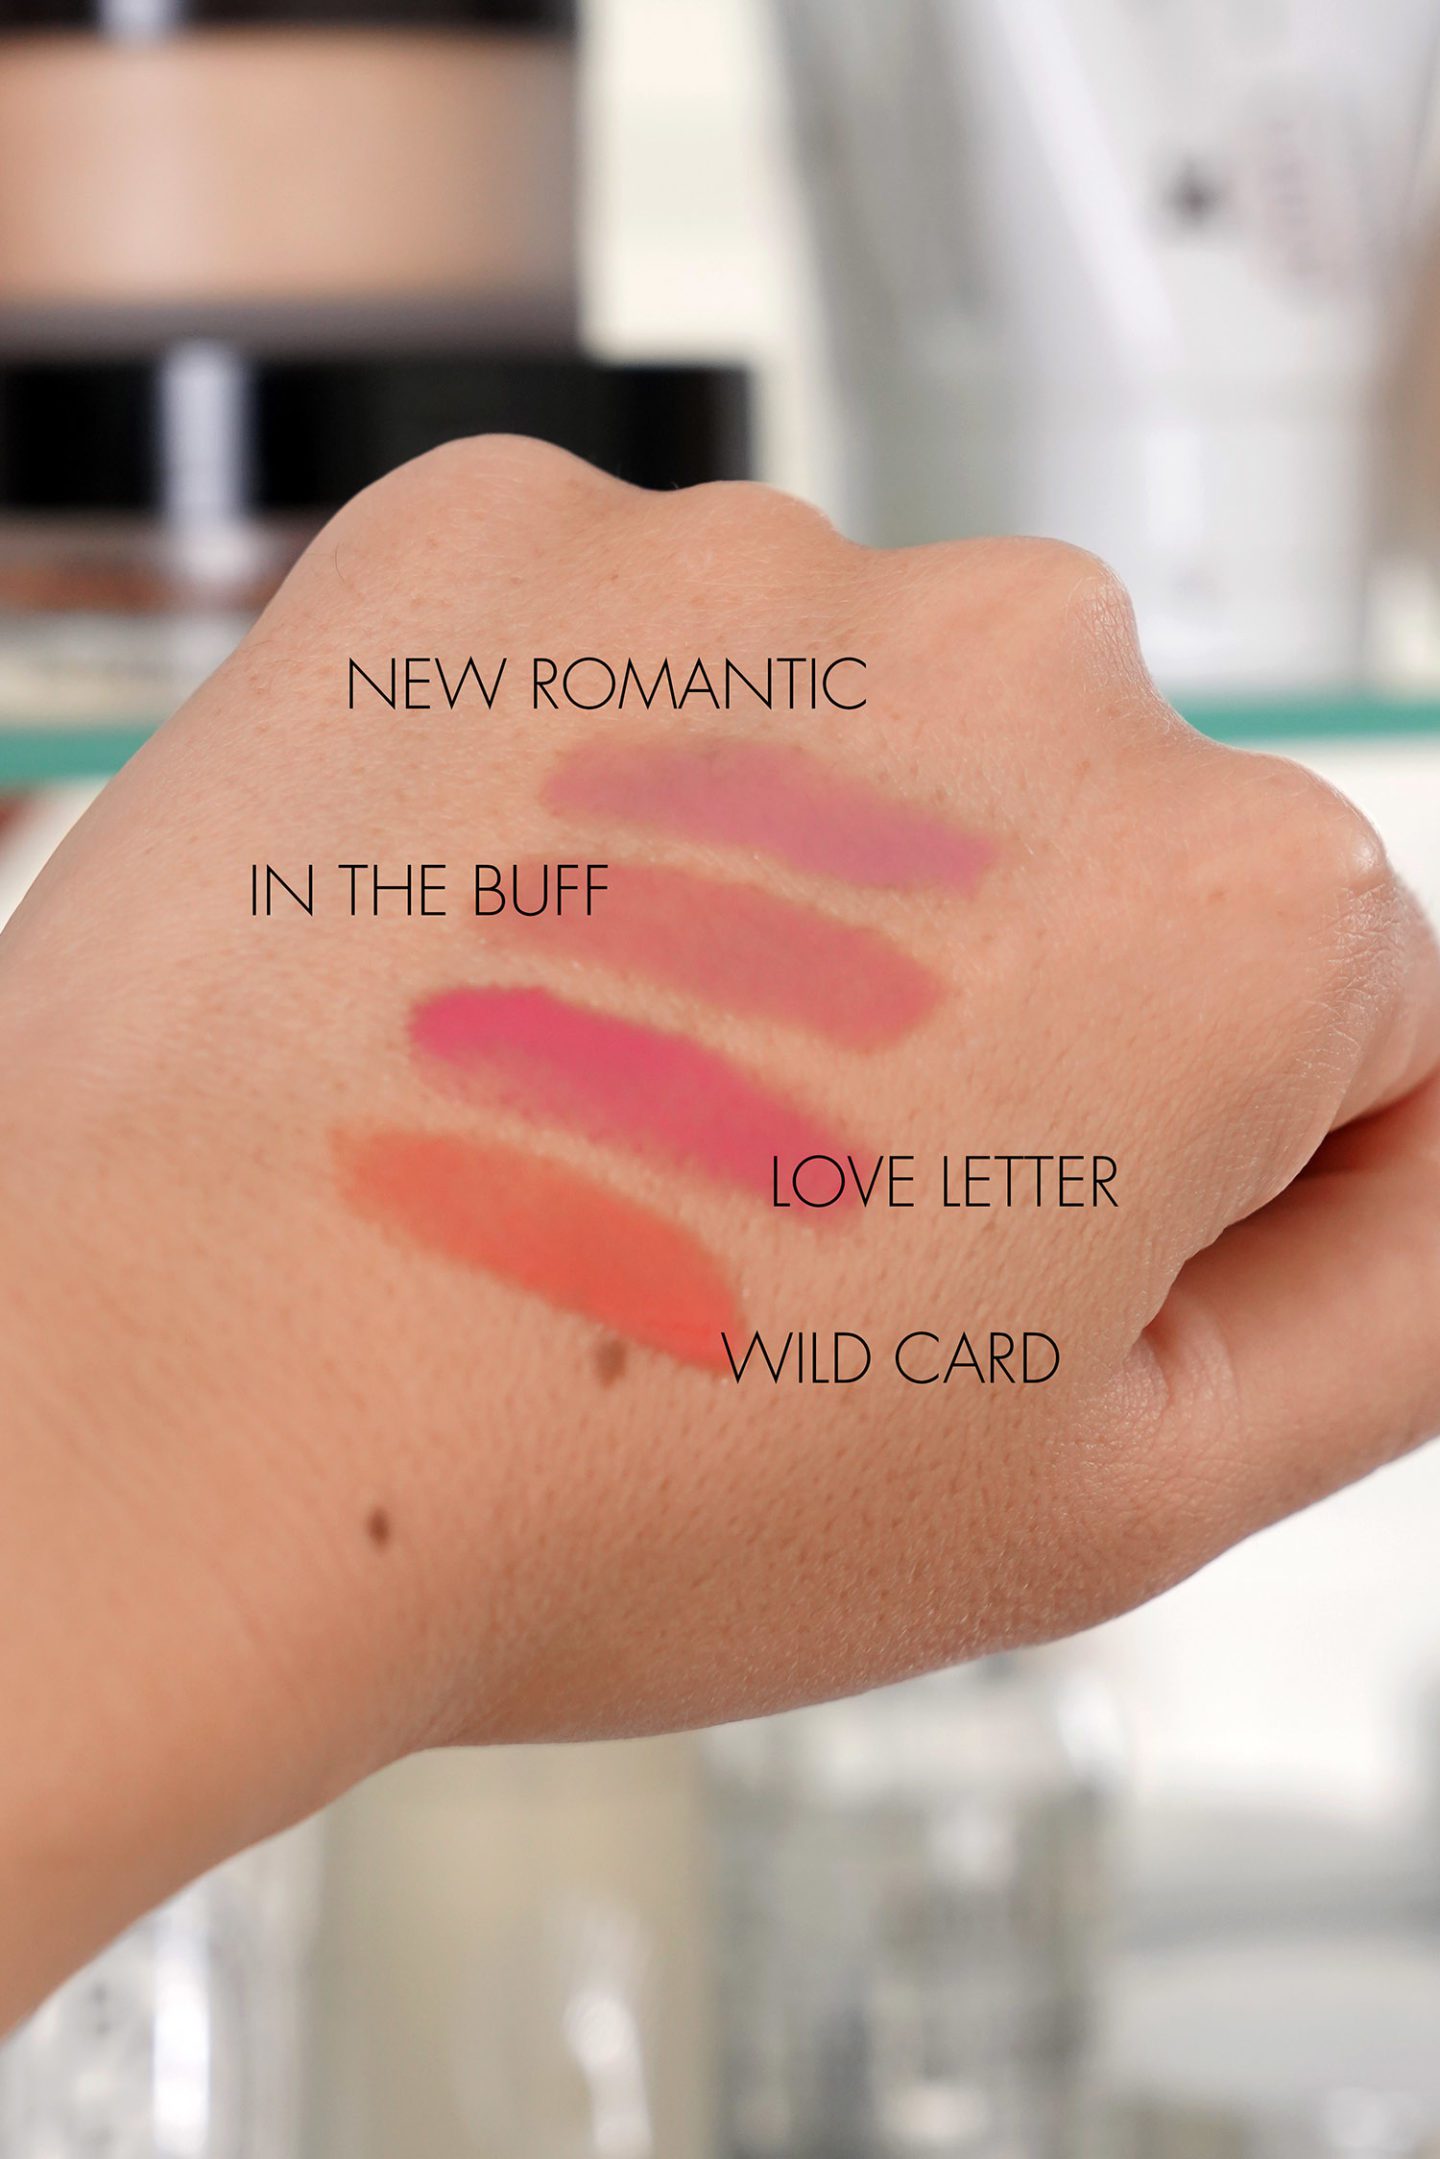 Bobbi Brown Crushed Oil Infused Gloss swatches